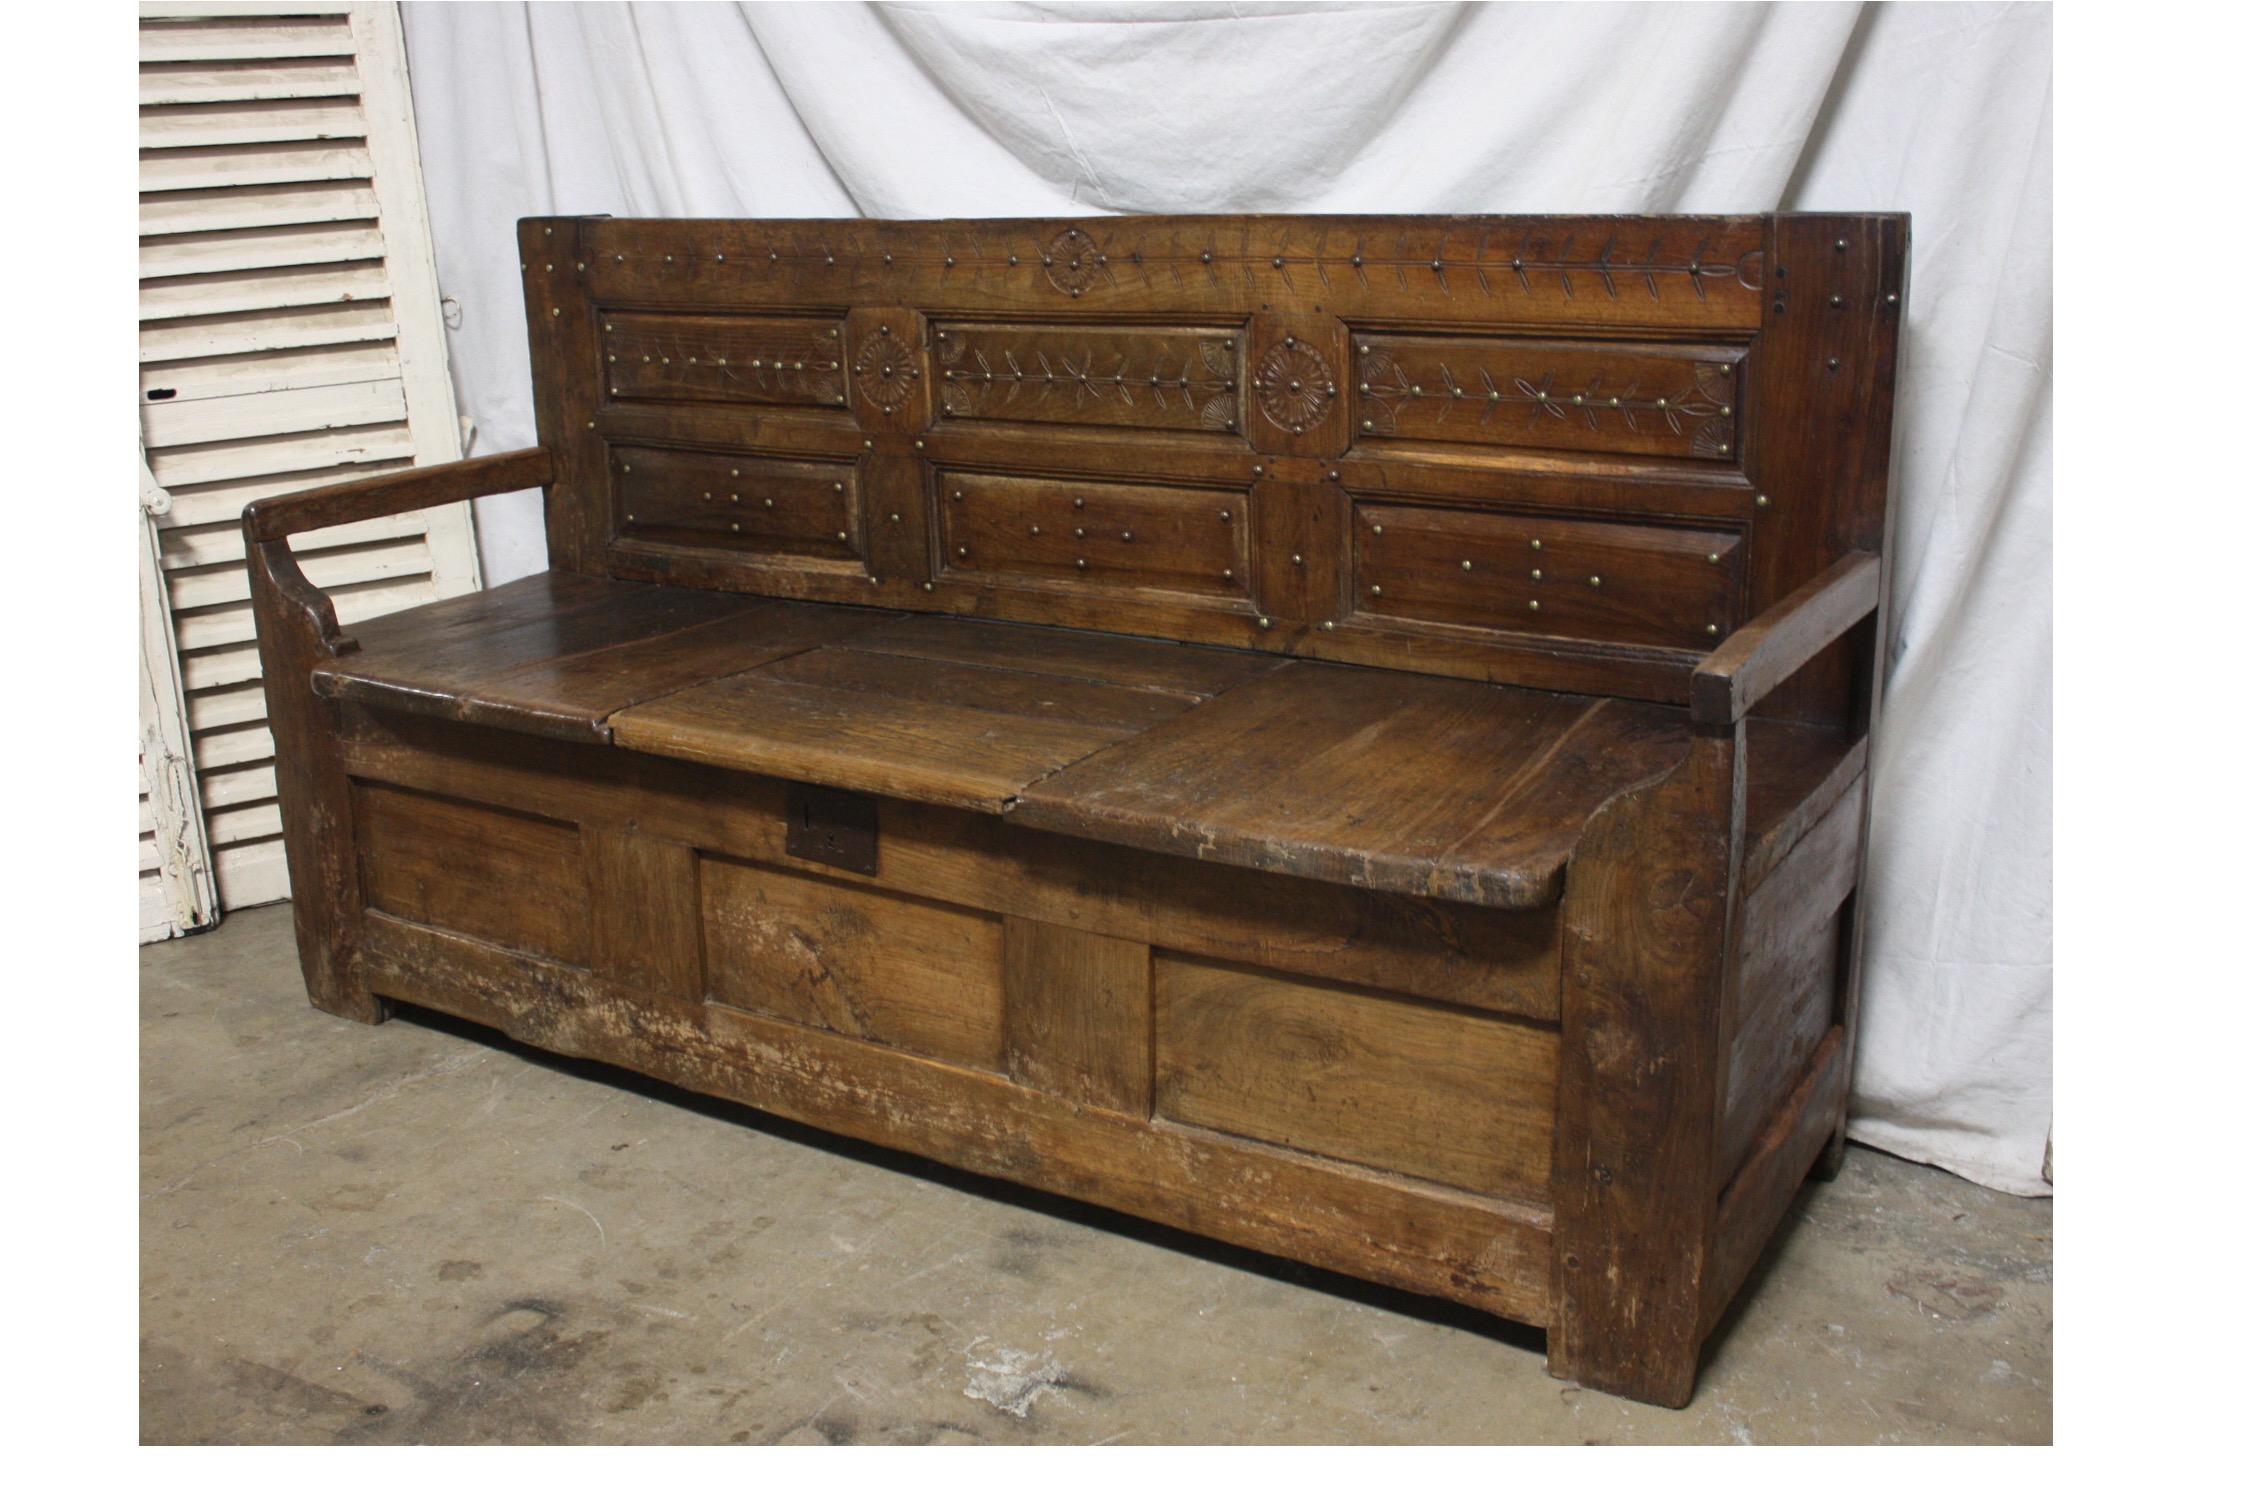 Early 18th century French bench from Brittany.